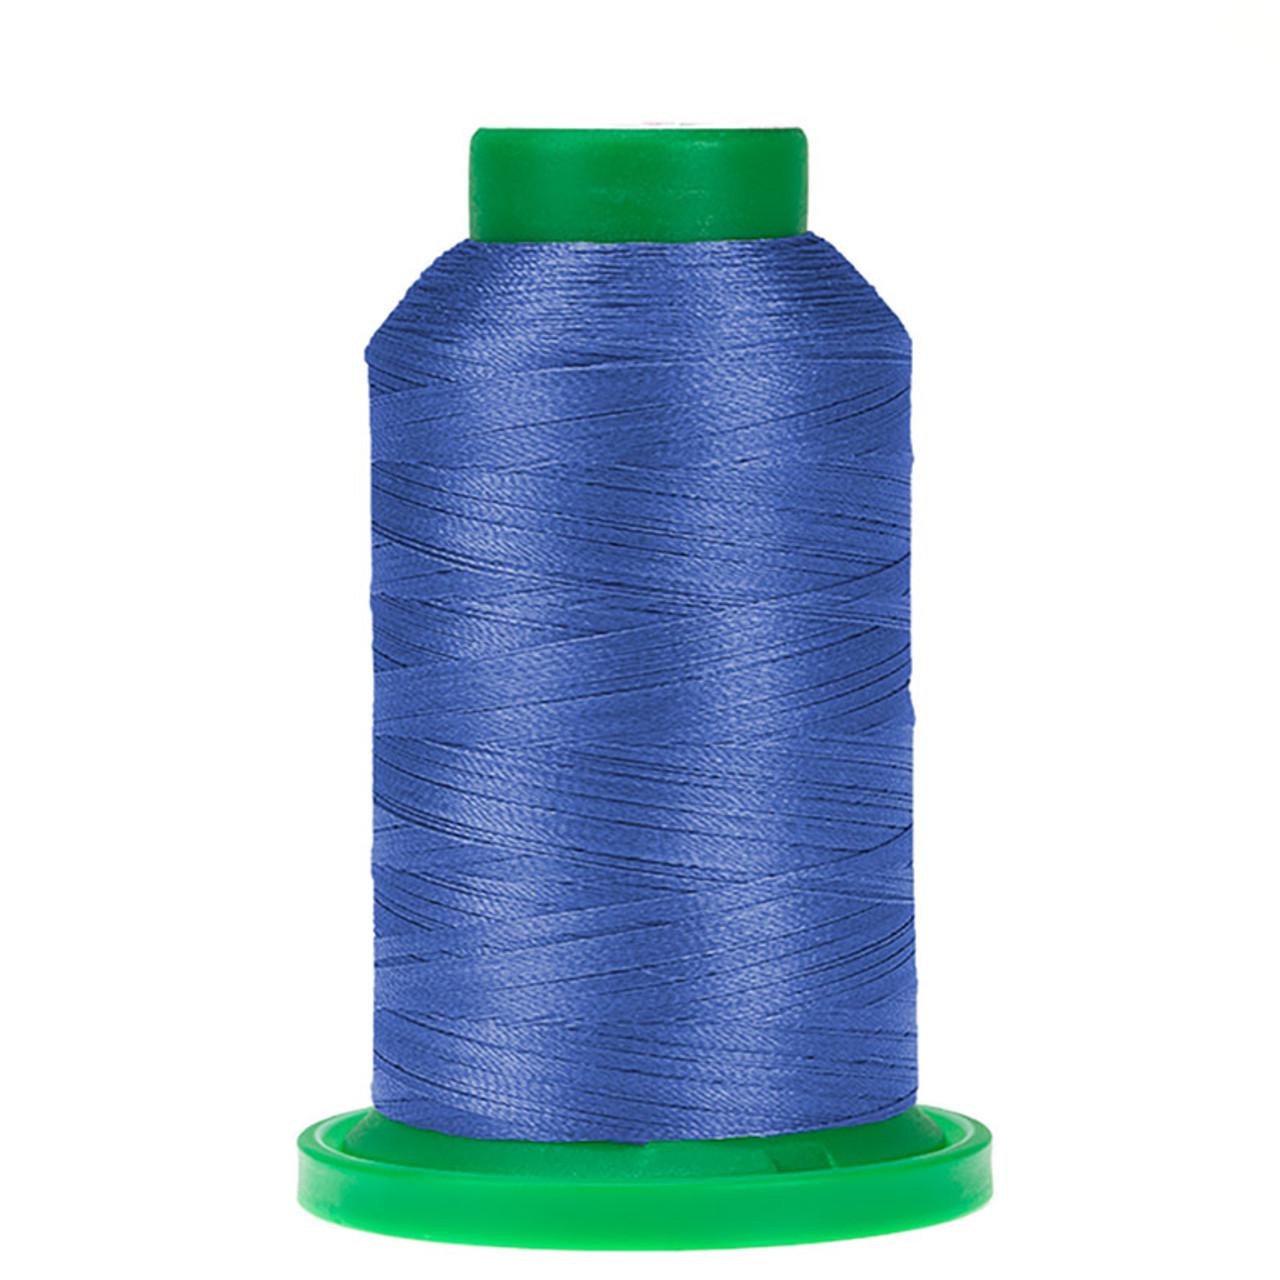 Isacord #3631 Tufts Blue